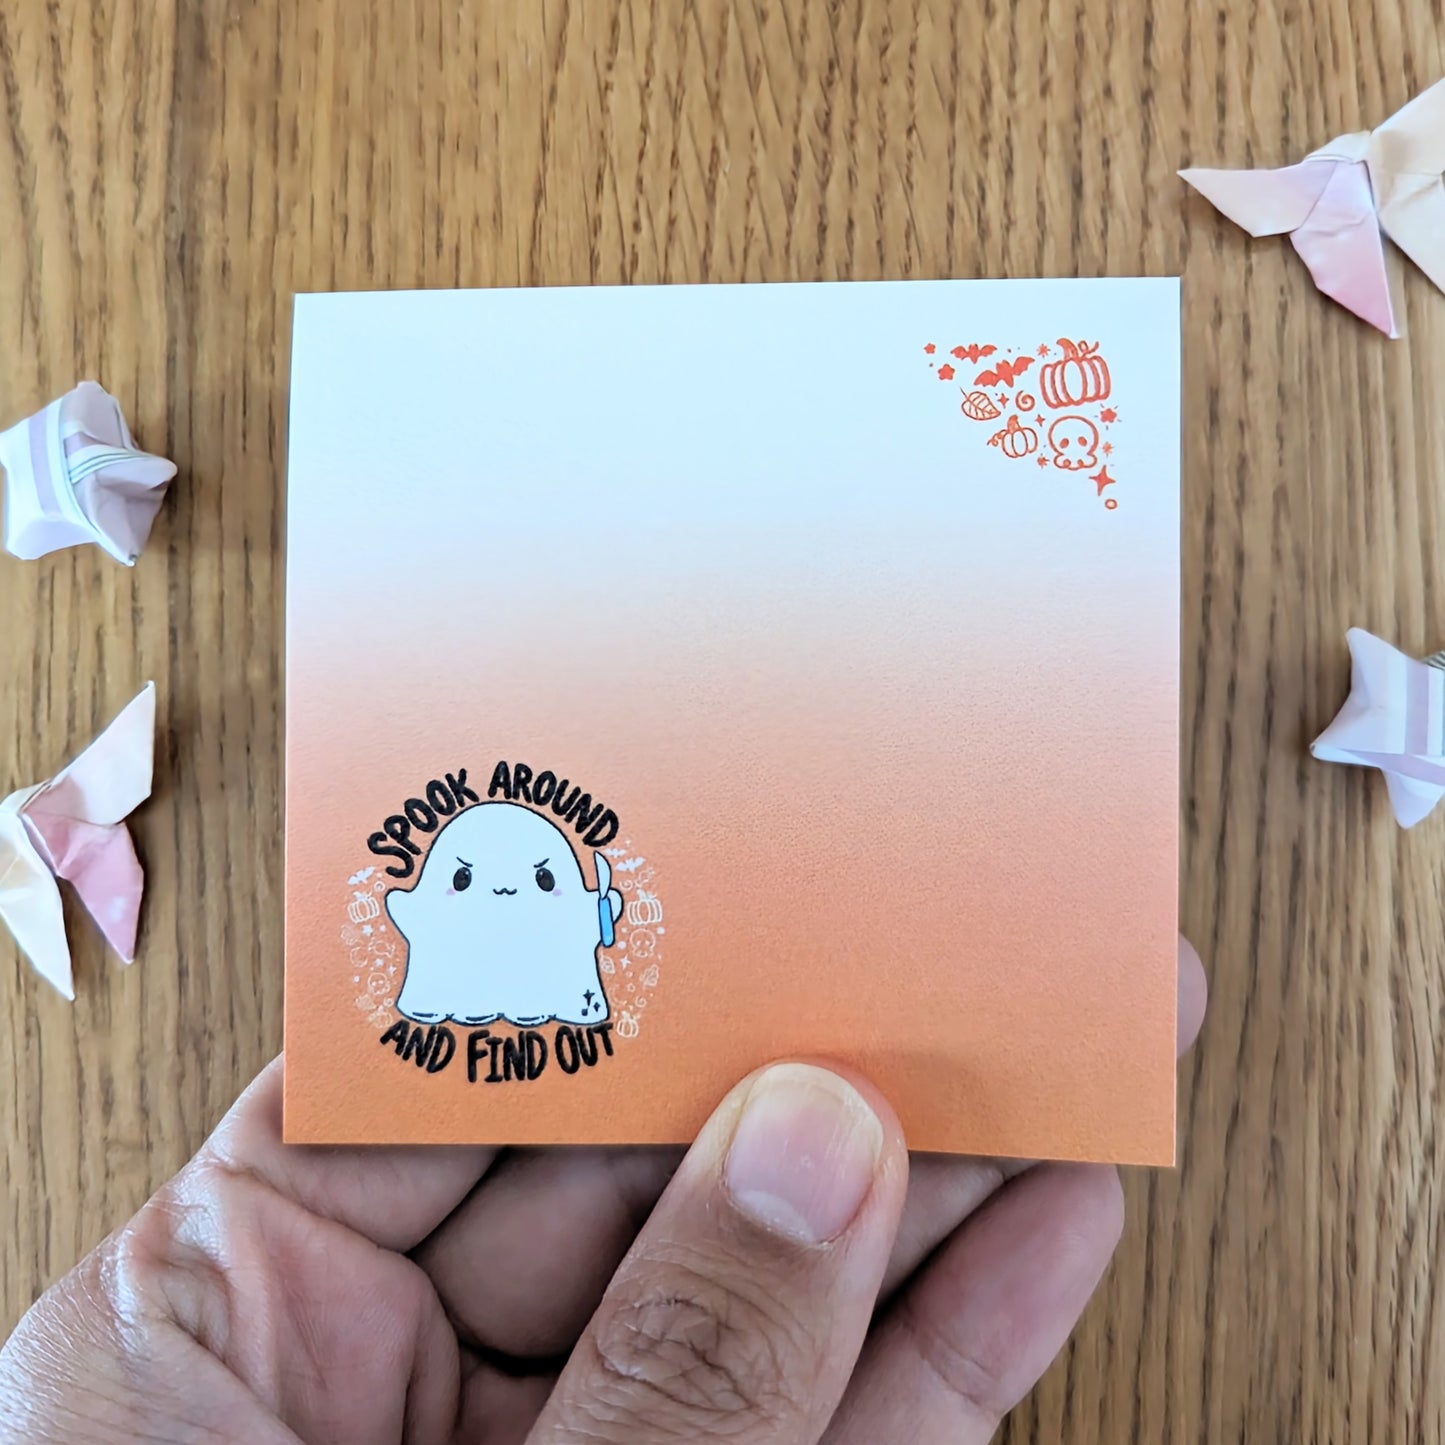 Spooky Around And Find Out Sticky Notes